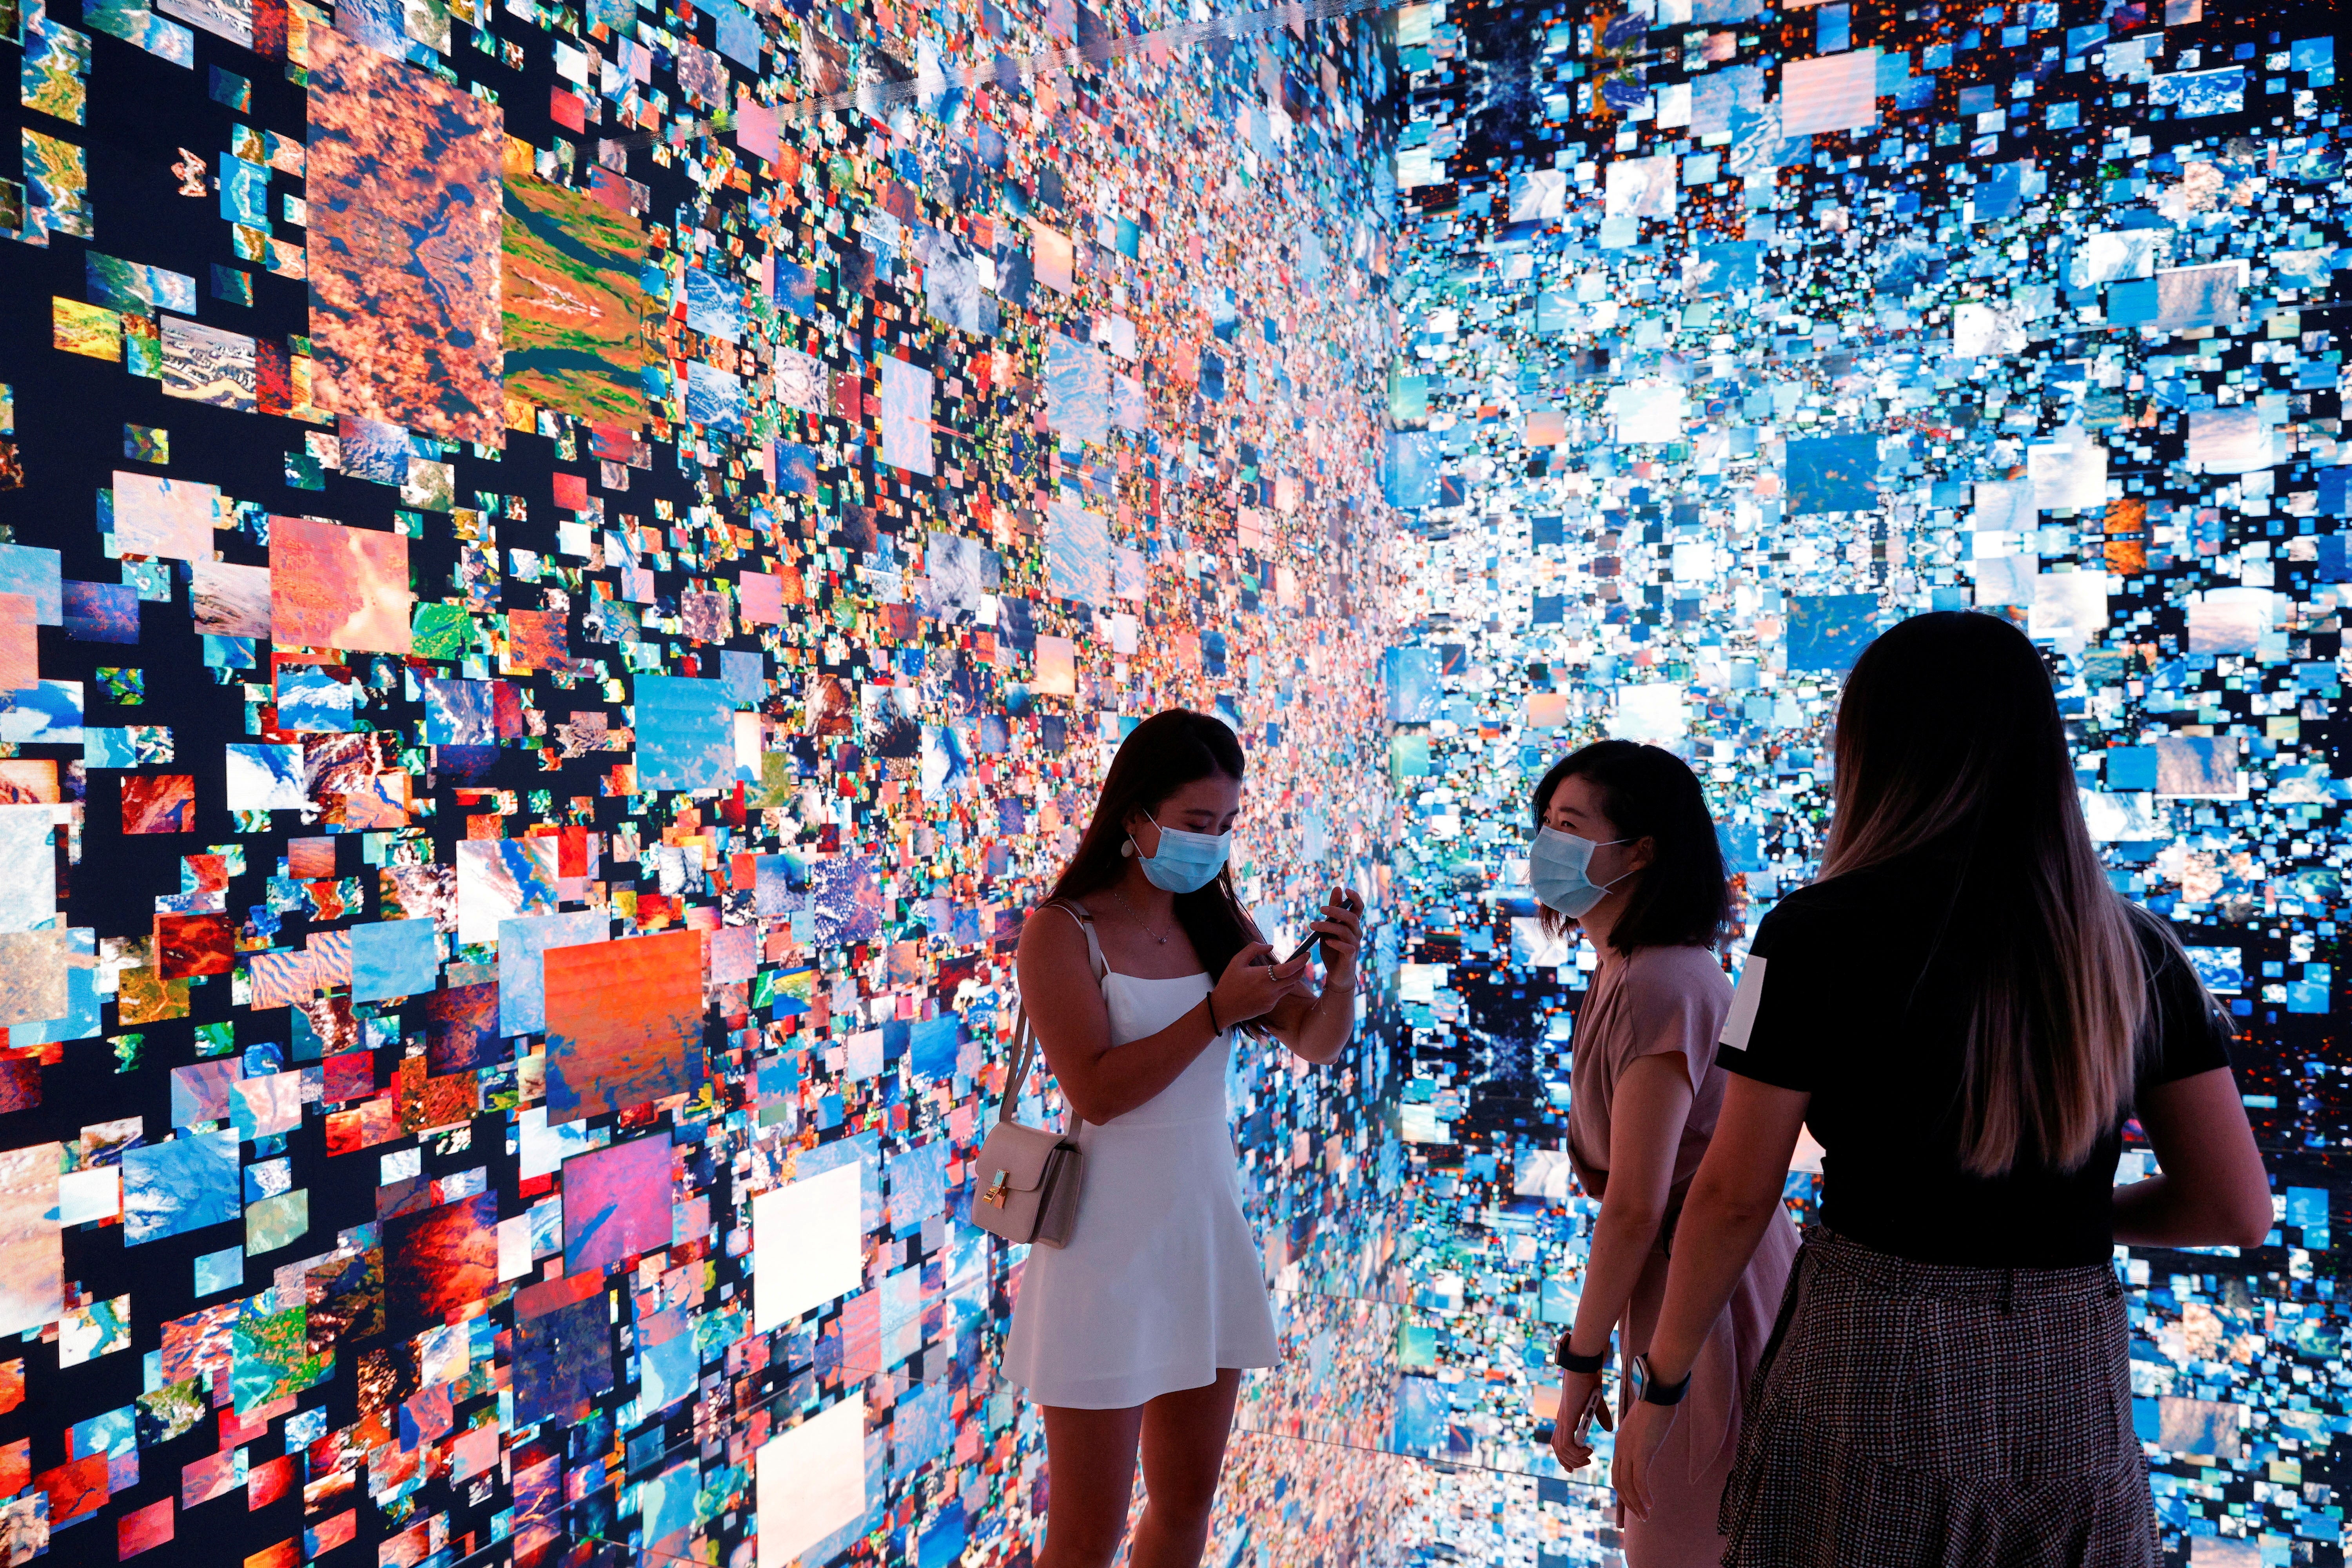 Visitors are pictured in front of an immersive art installation titled "Machine Hallucinations — Space: Metaverse" by media artist Refik Anadol